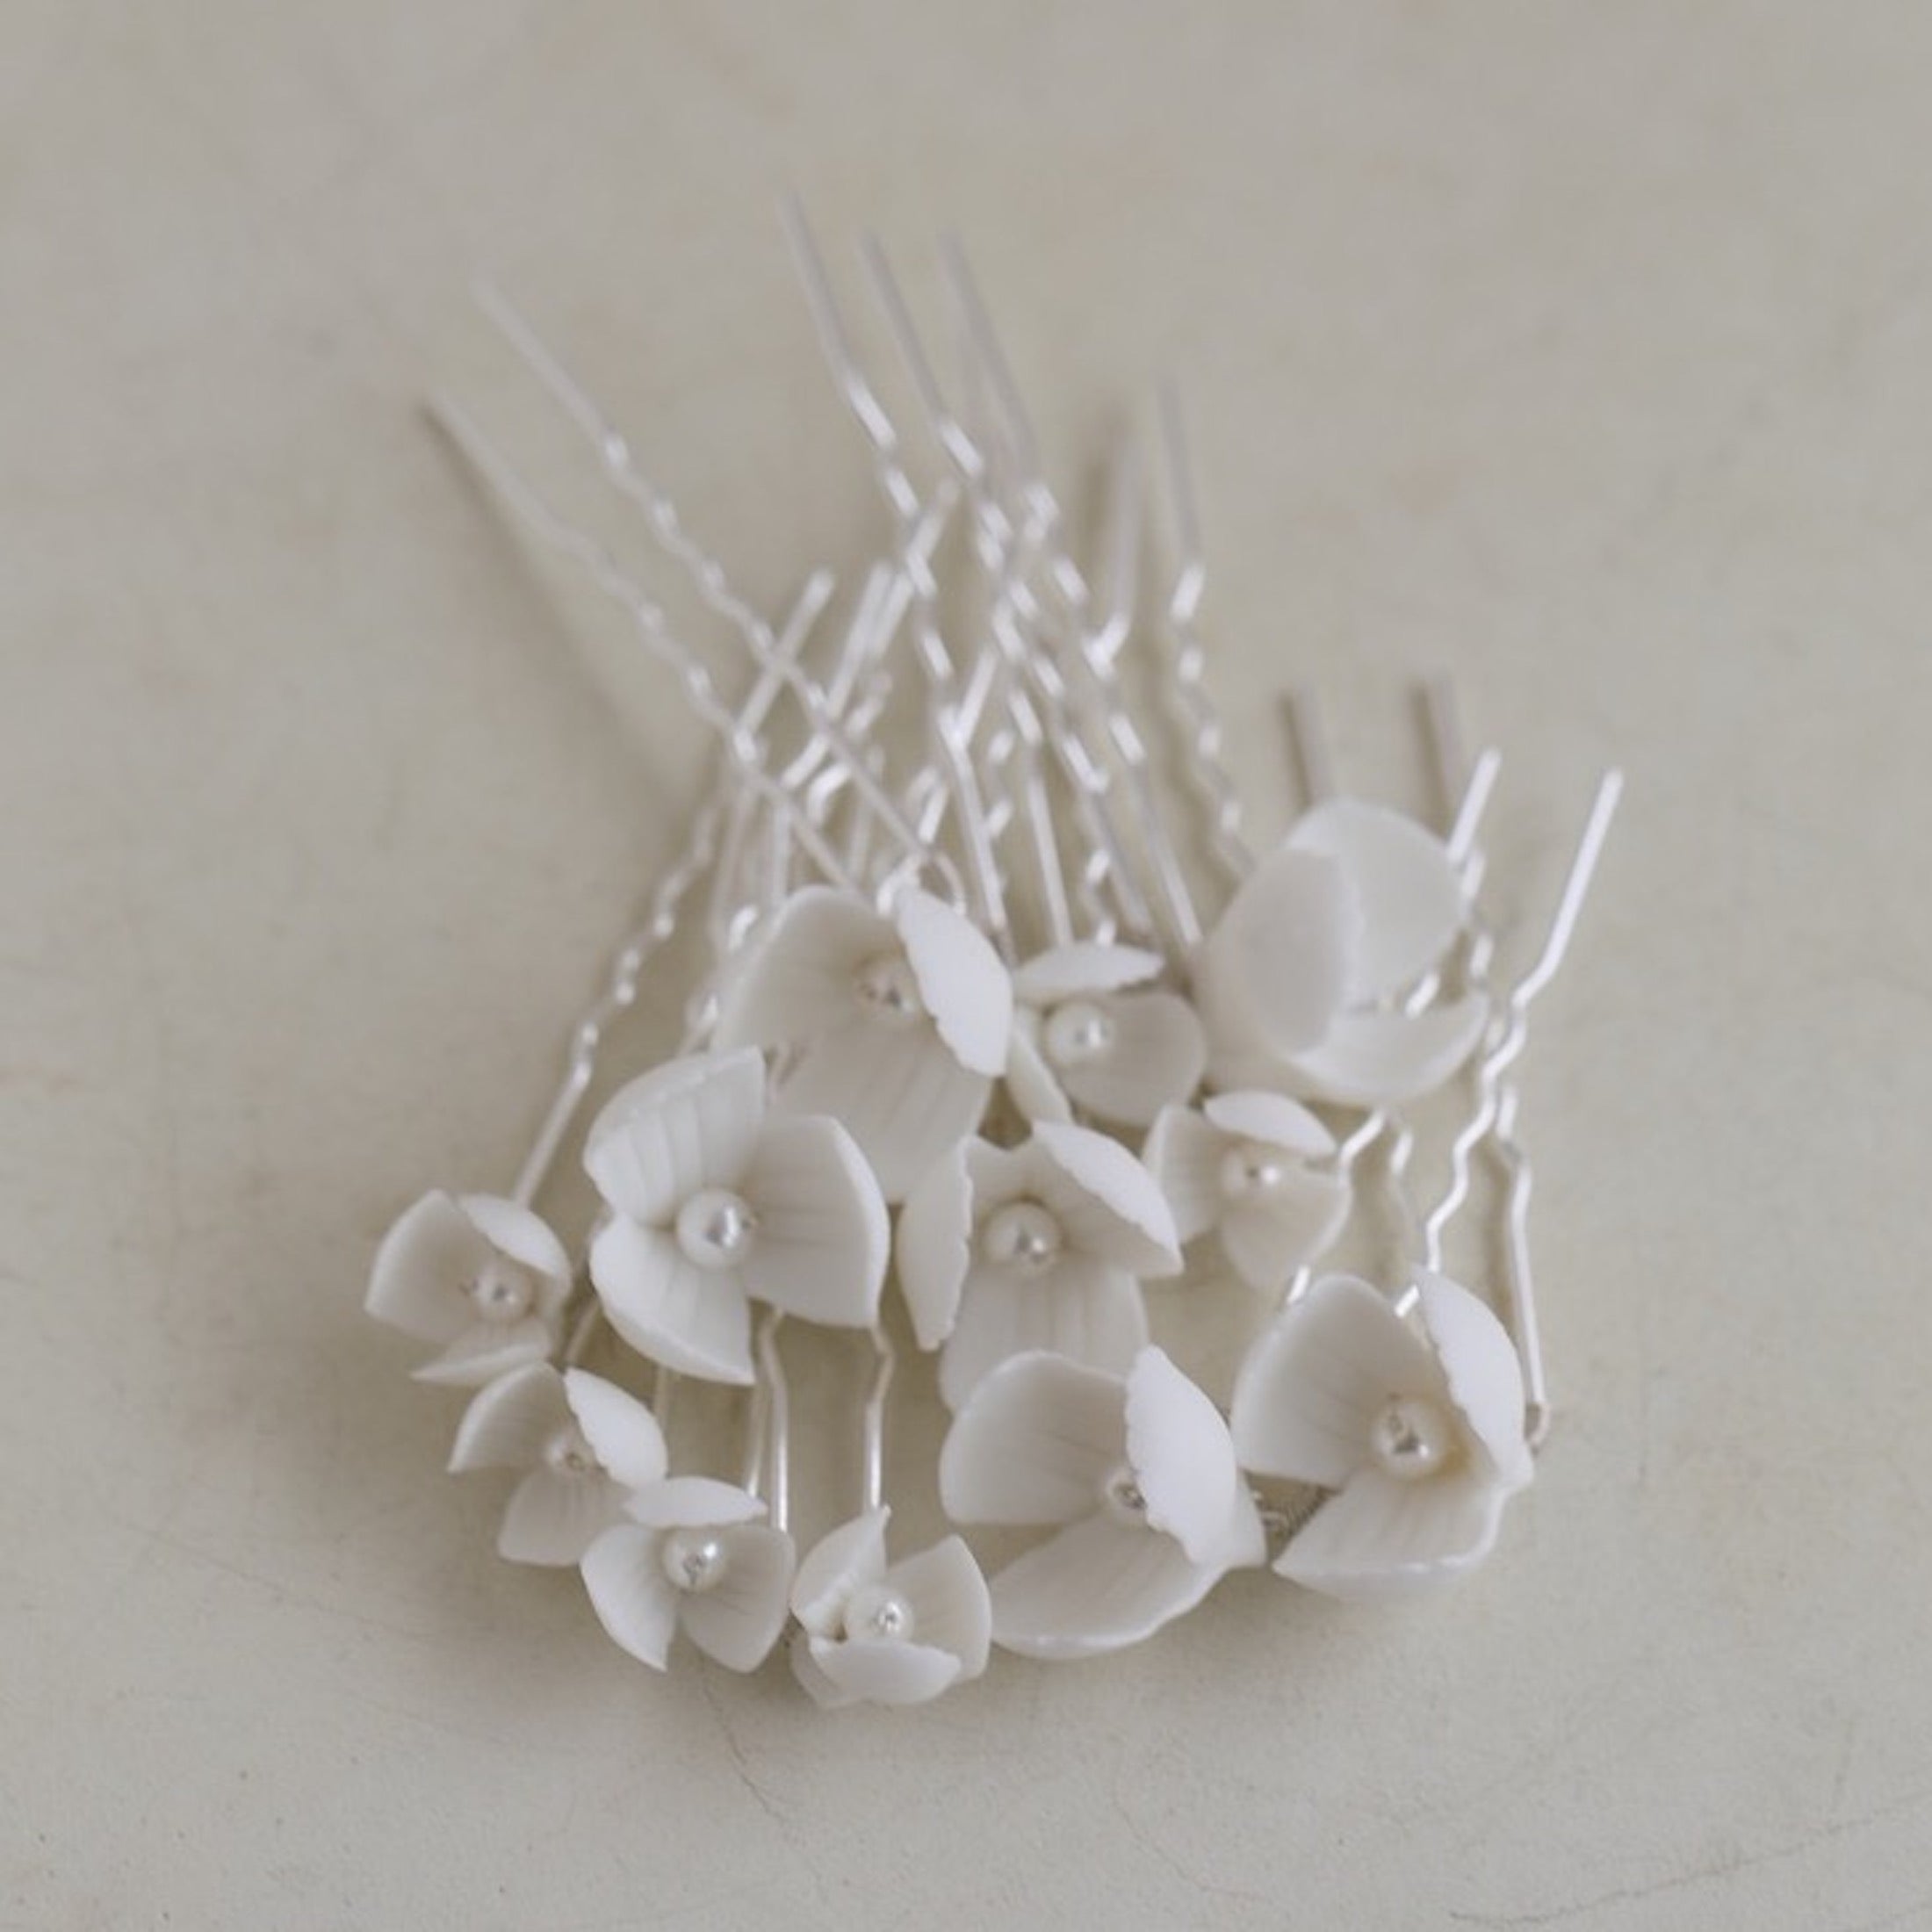 Handcrafted white ceramic flowers bridal hairpin set-One set of 8